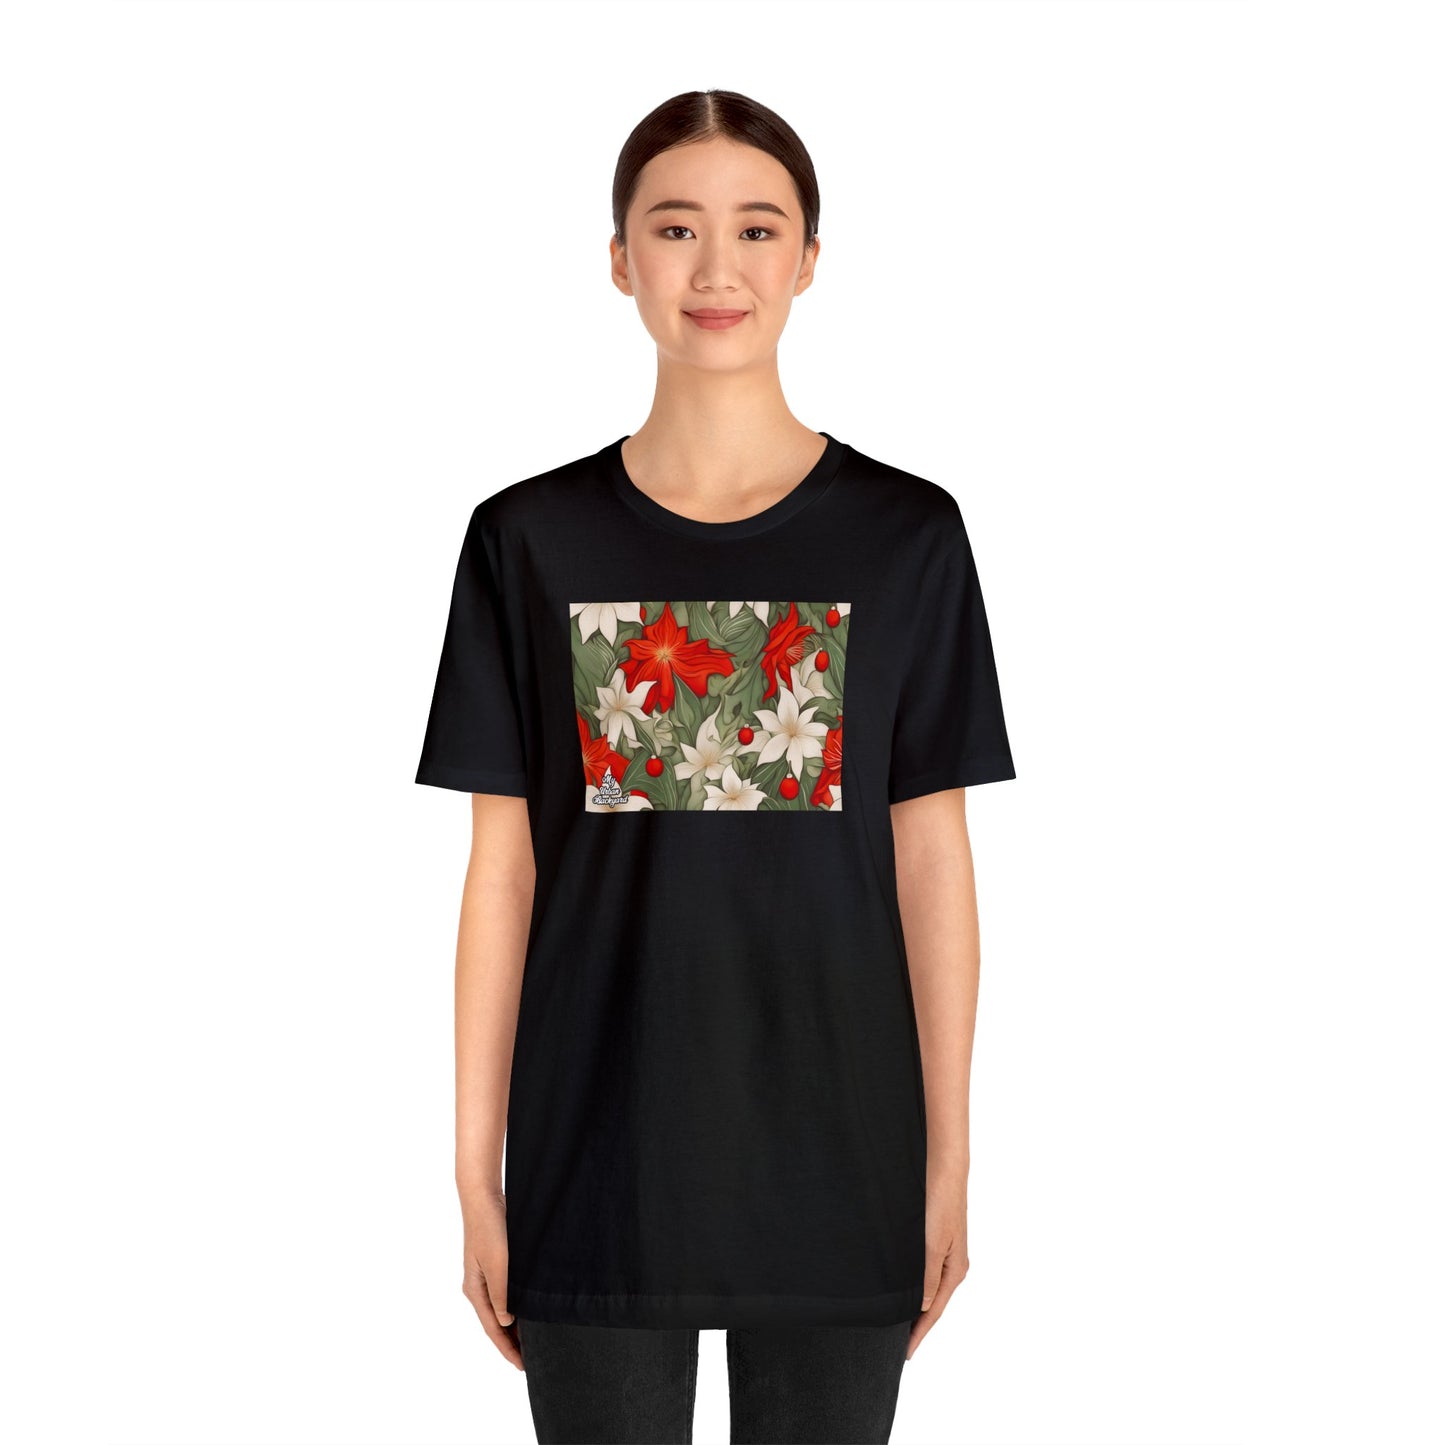 Holiday Flowers, Soft 100% Jersey Cotton T-Shirt, Unisex, Short Sleeve, Retail Fit